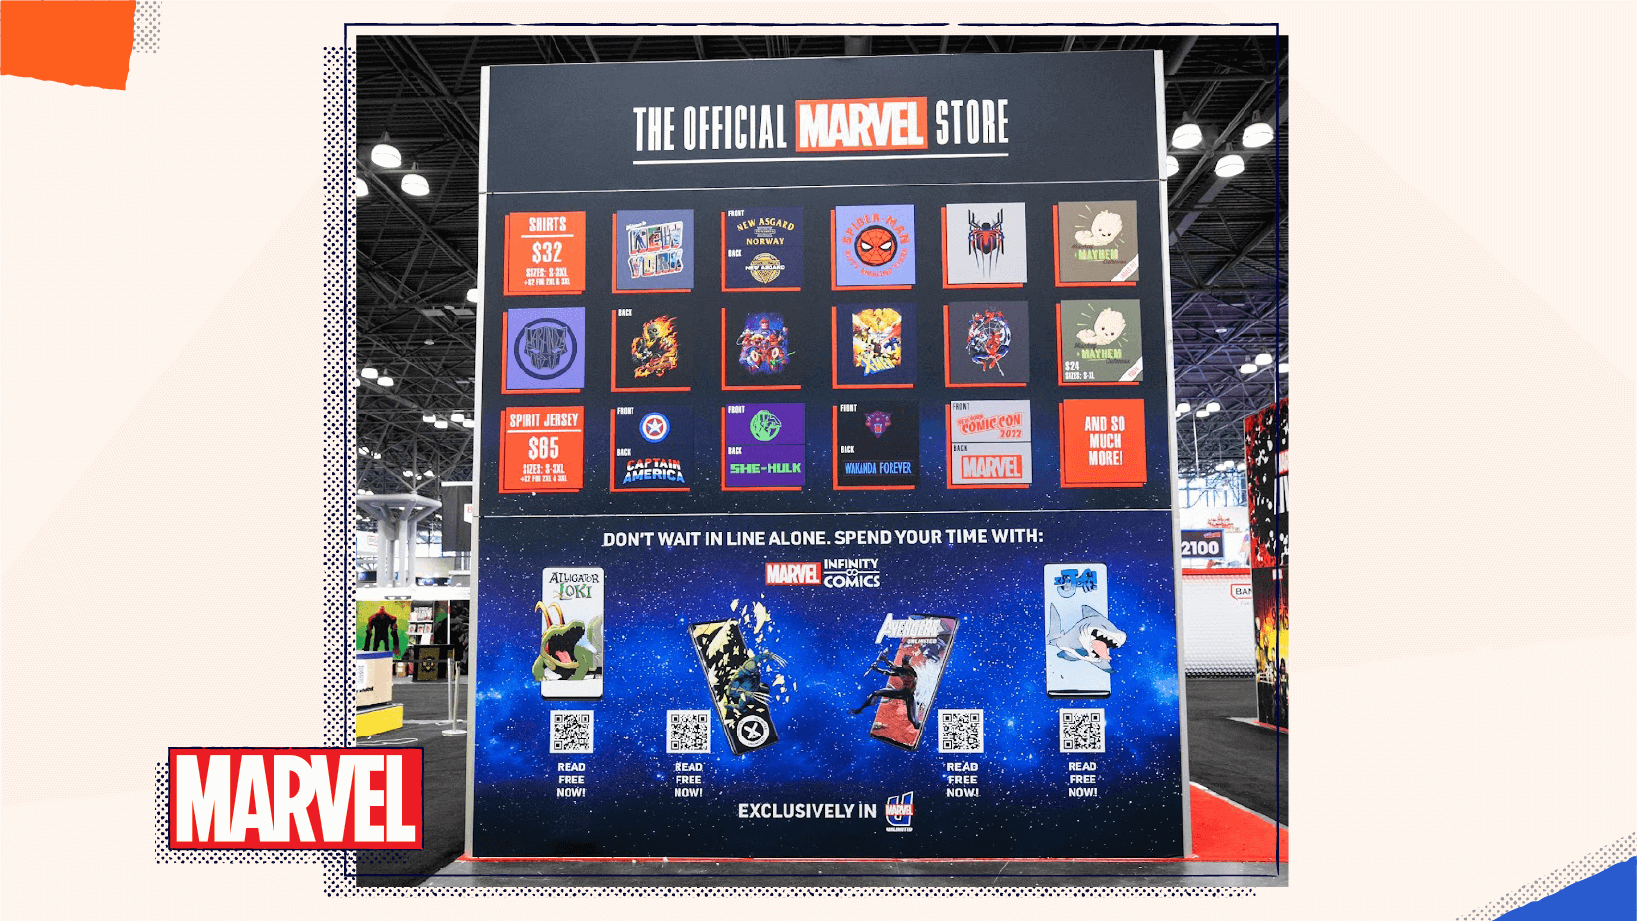 A large Marvel display at Comic-Con showing examples of merchandise that can be bought online by scanning the QR Codes.